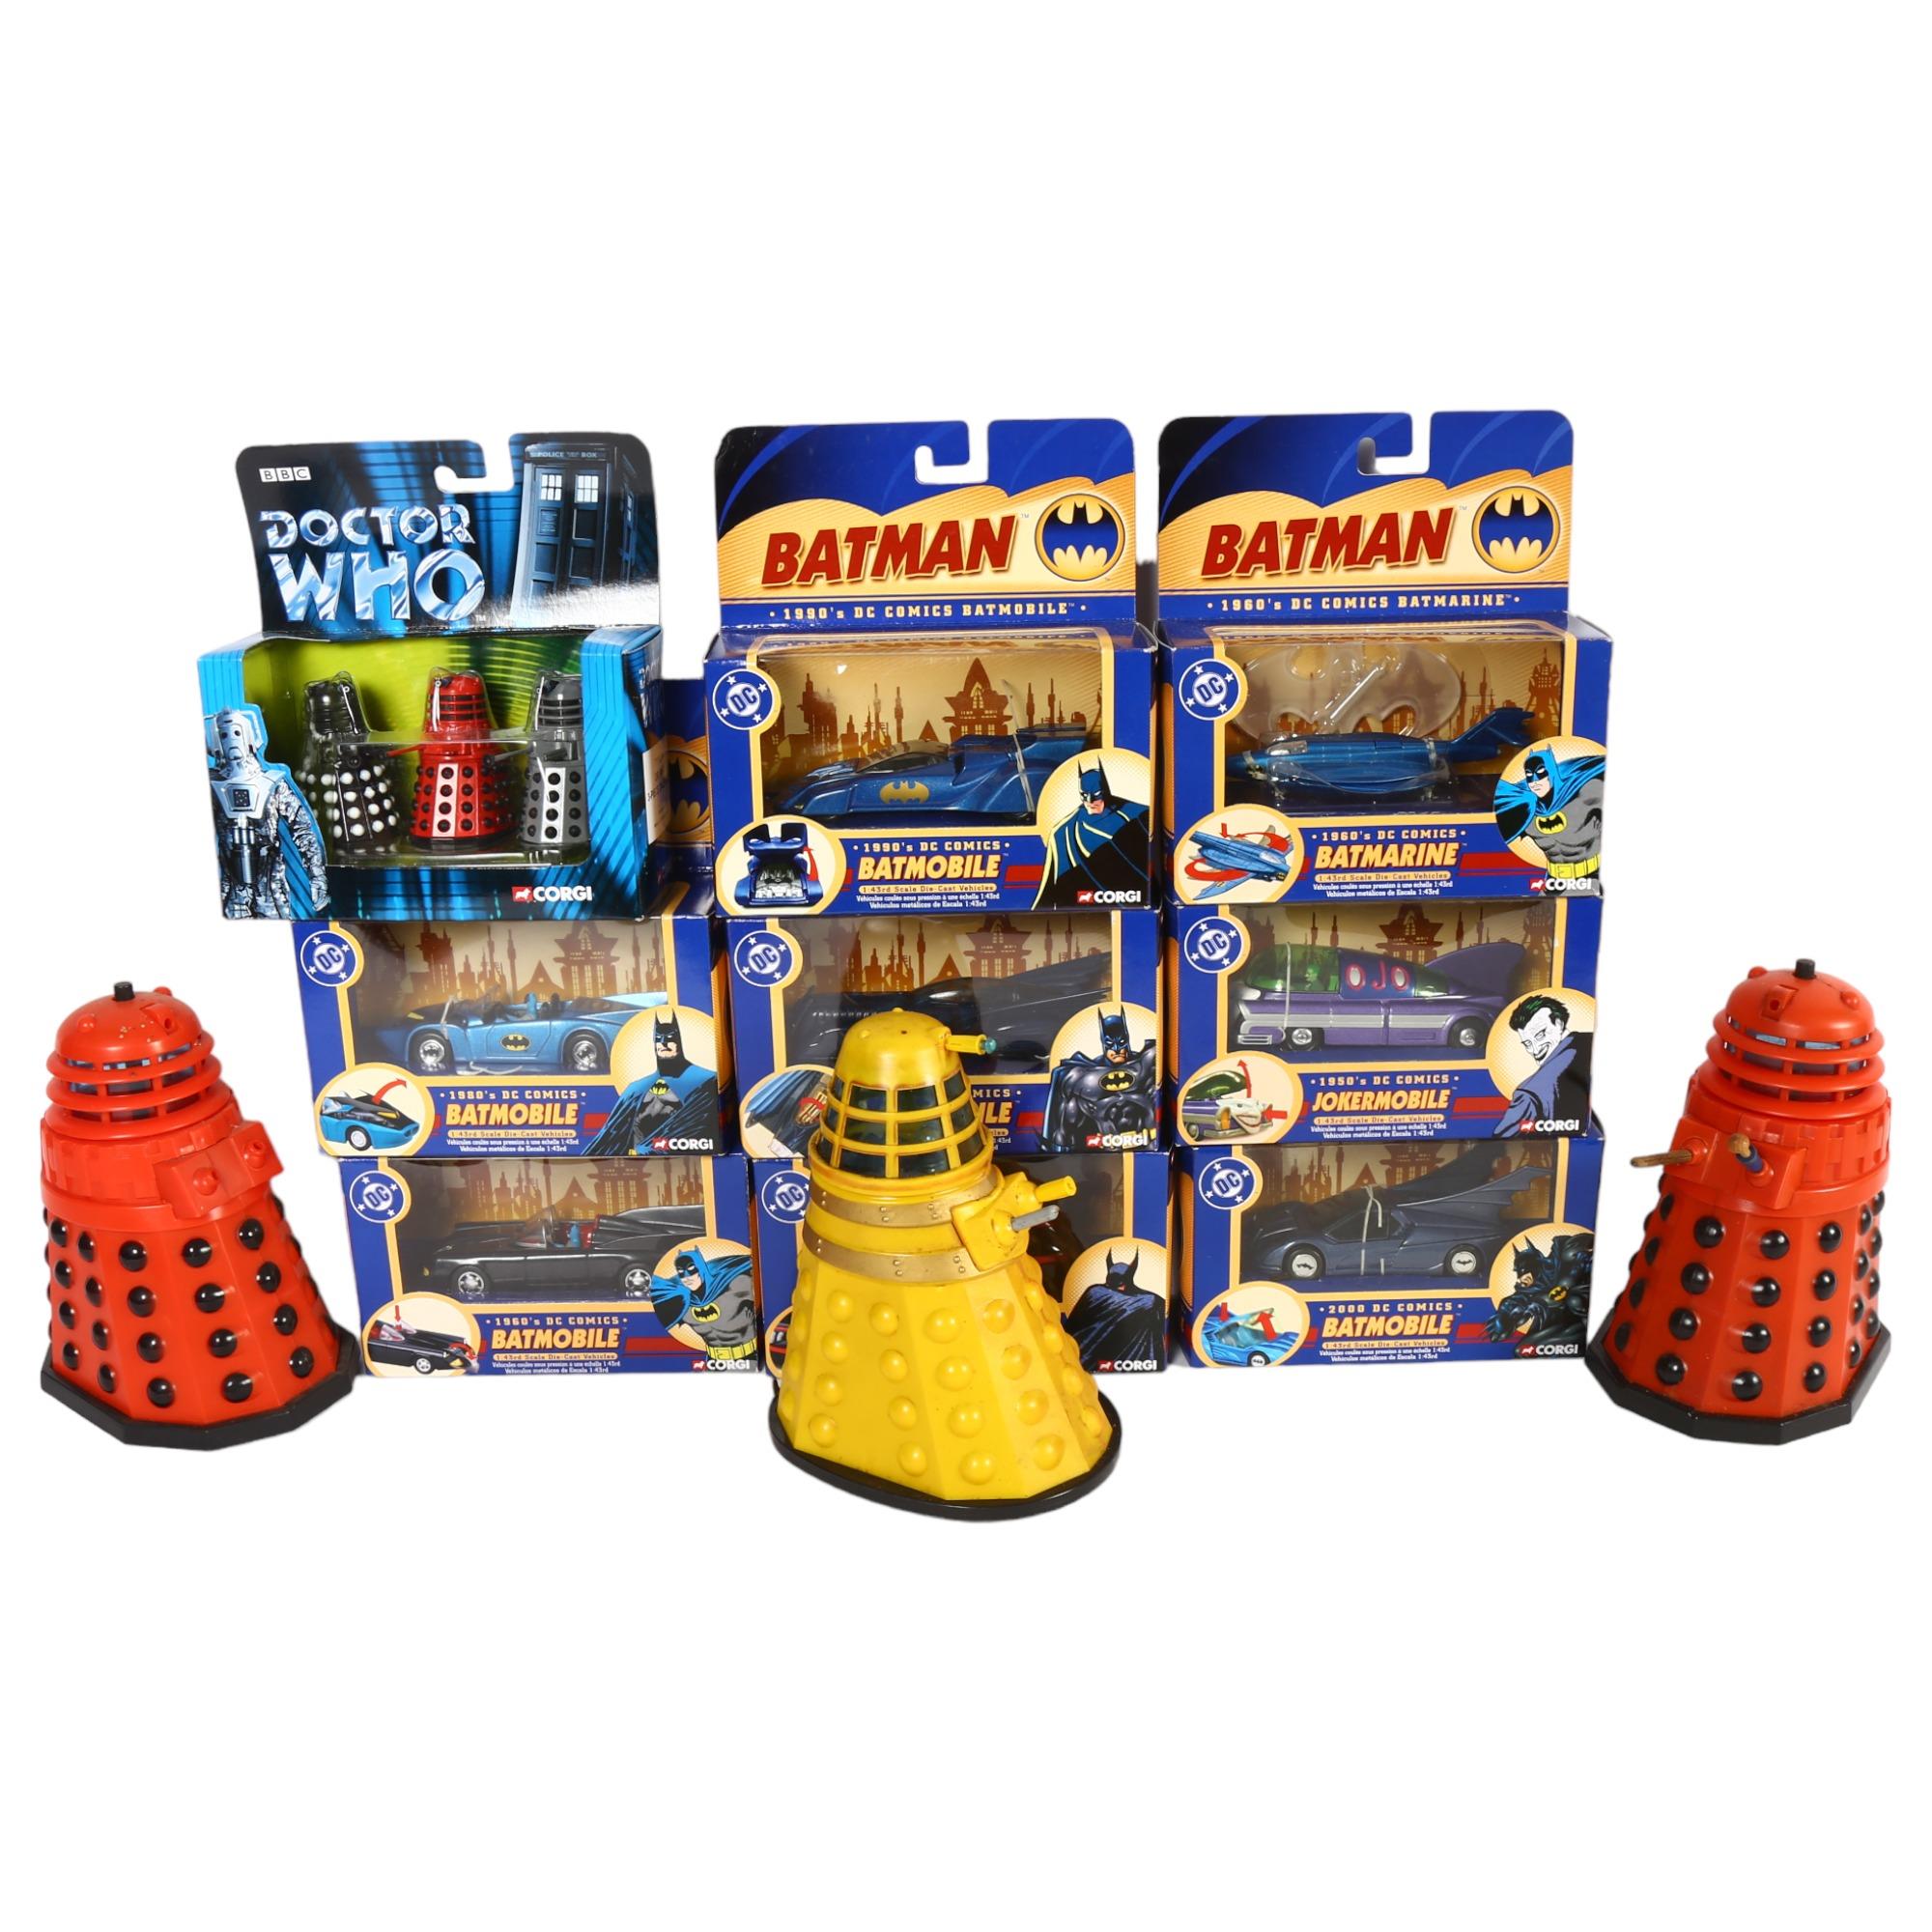 DOCTOR WHO - 2 similar Vintage Tomy plastic toy Daleks, H16cm, and a yellow Marx Toys Vintage